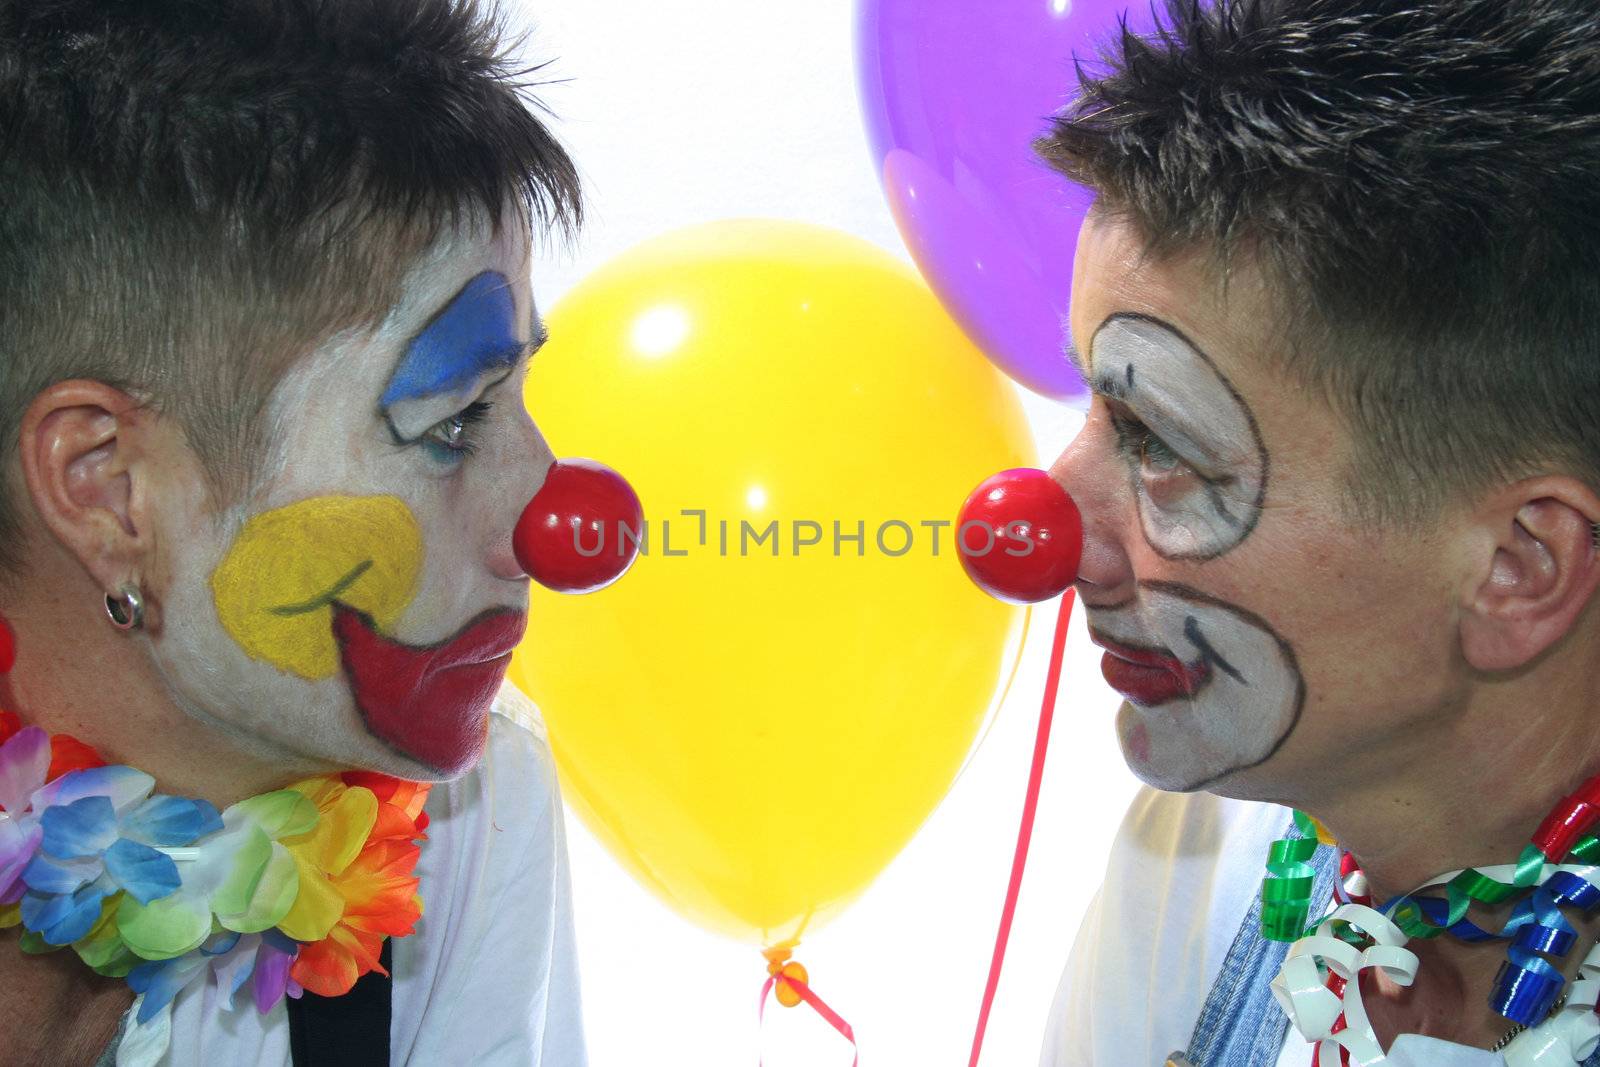 Two clowns with red nose by discovery